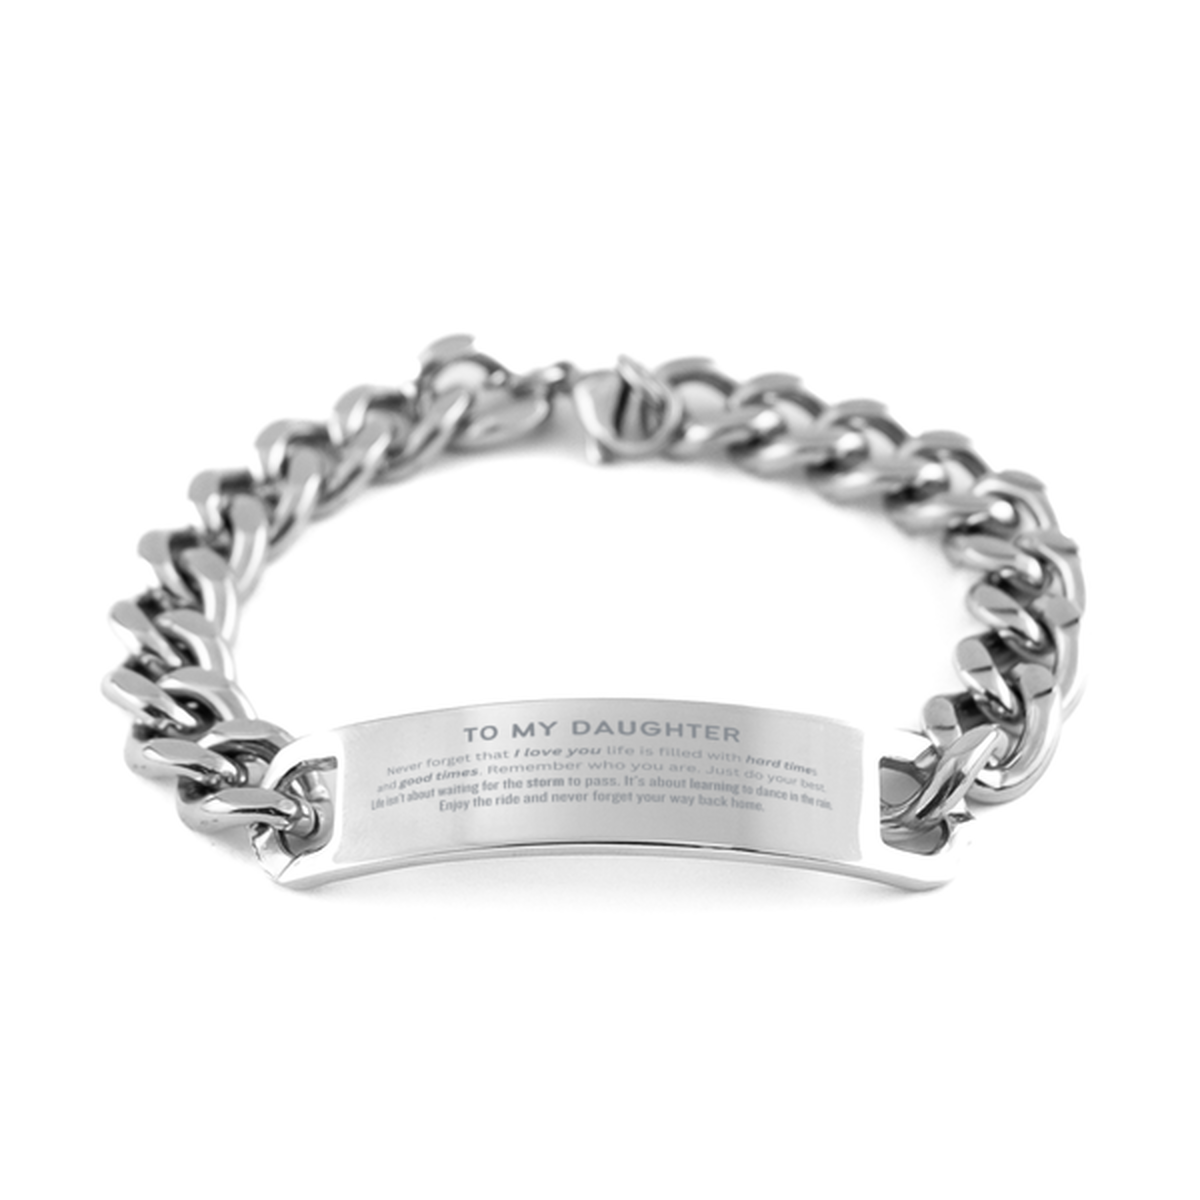 Christmas Daughter Cuban Chain Stainless Steel Bracelet Gifts, To My Daughter Birthday Thank You Gifts For Daughter, Graduation Unique Gifts For Daughter To My Daughter Never forget that I love you life is filled with hard times and good times. Remember w